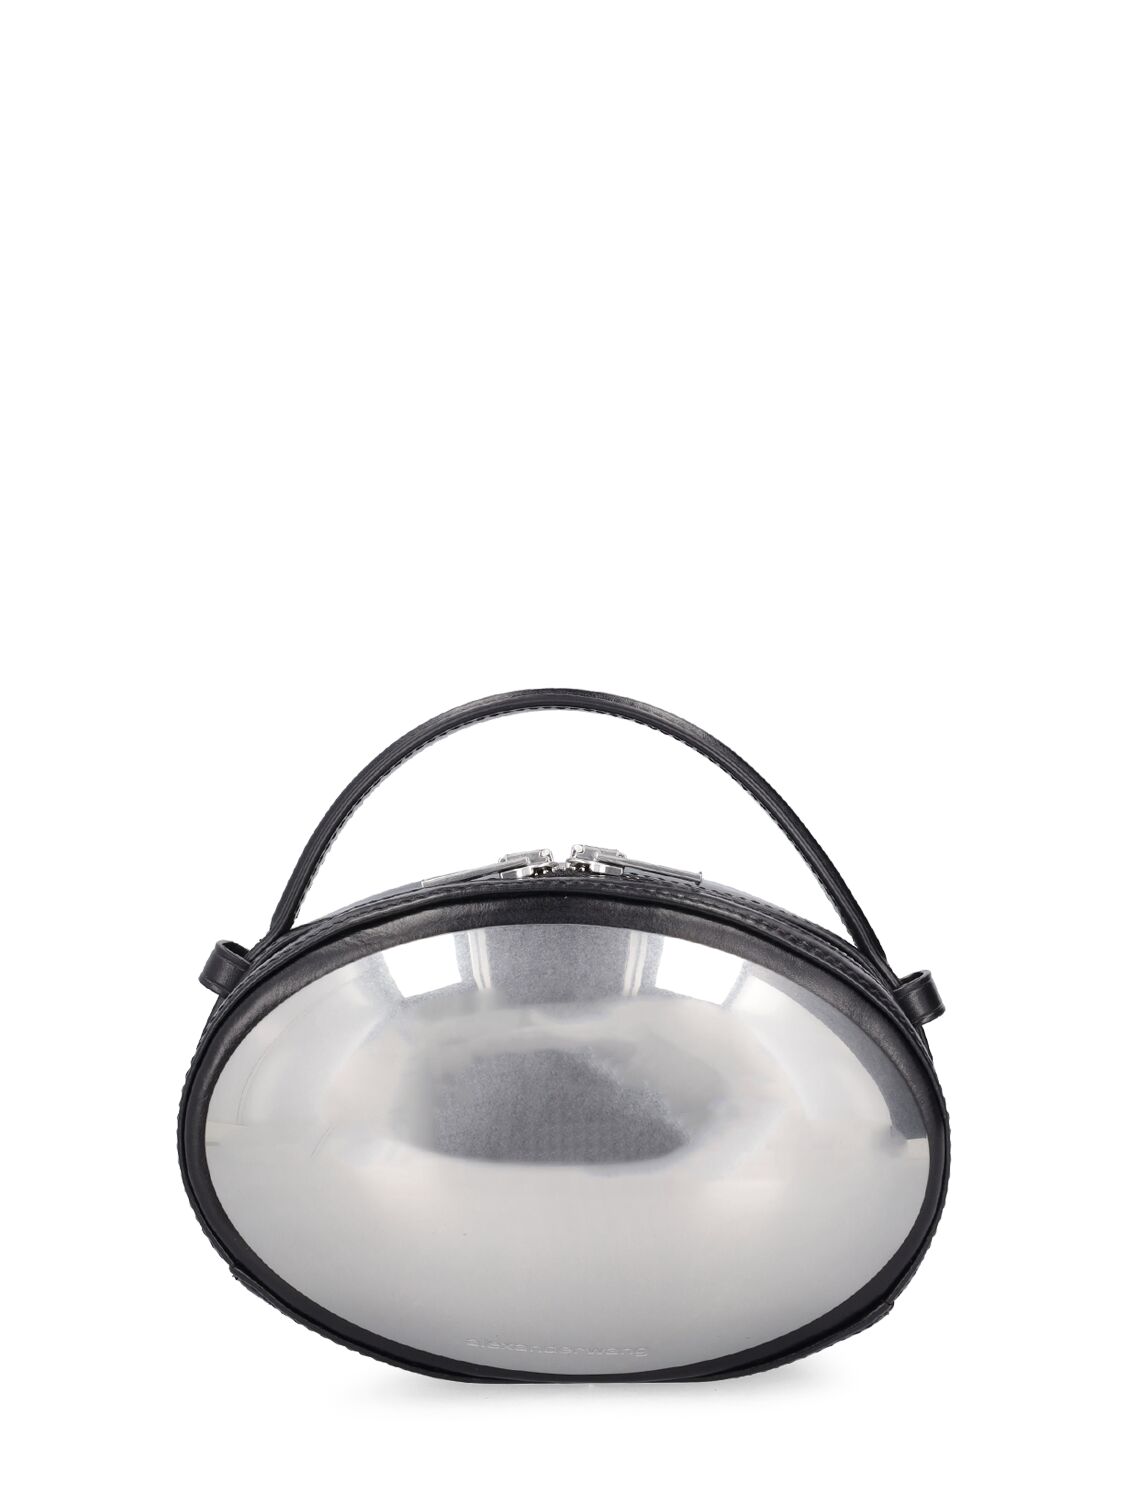 Alexander Wang Small Dome Leather Crossbody Bag In Black